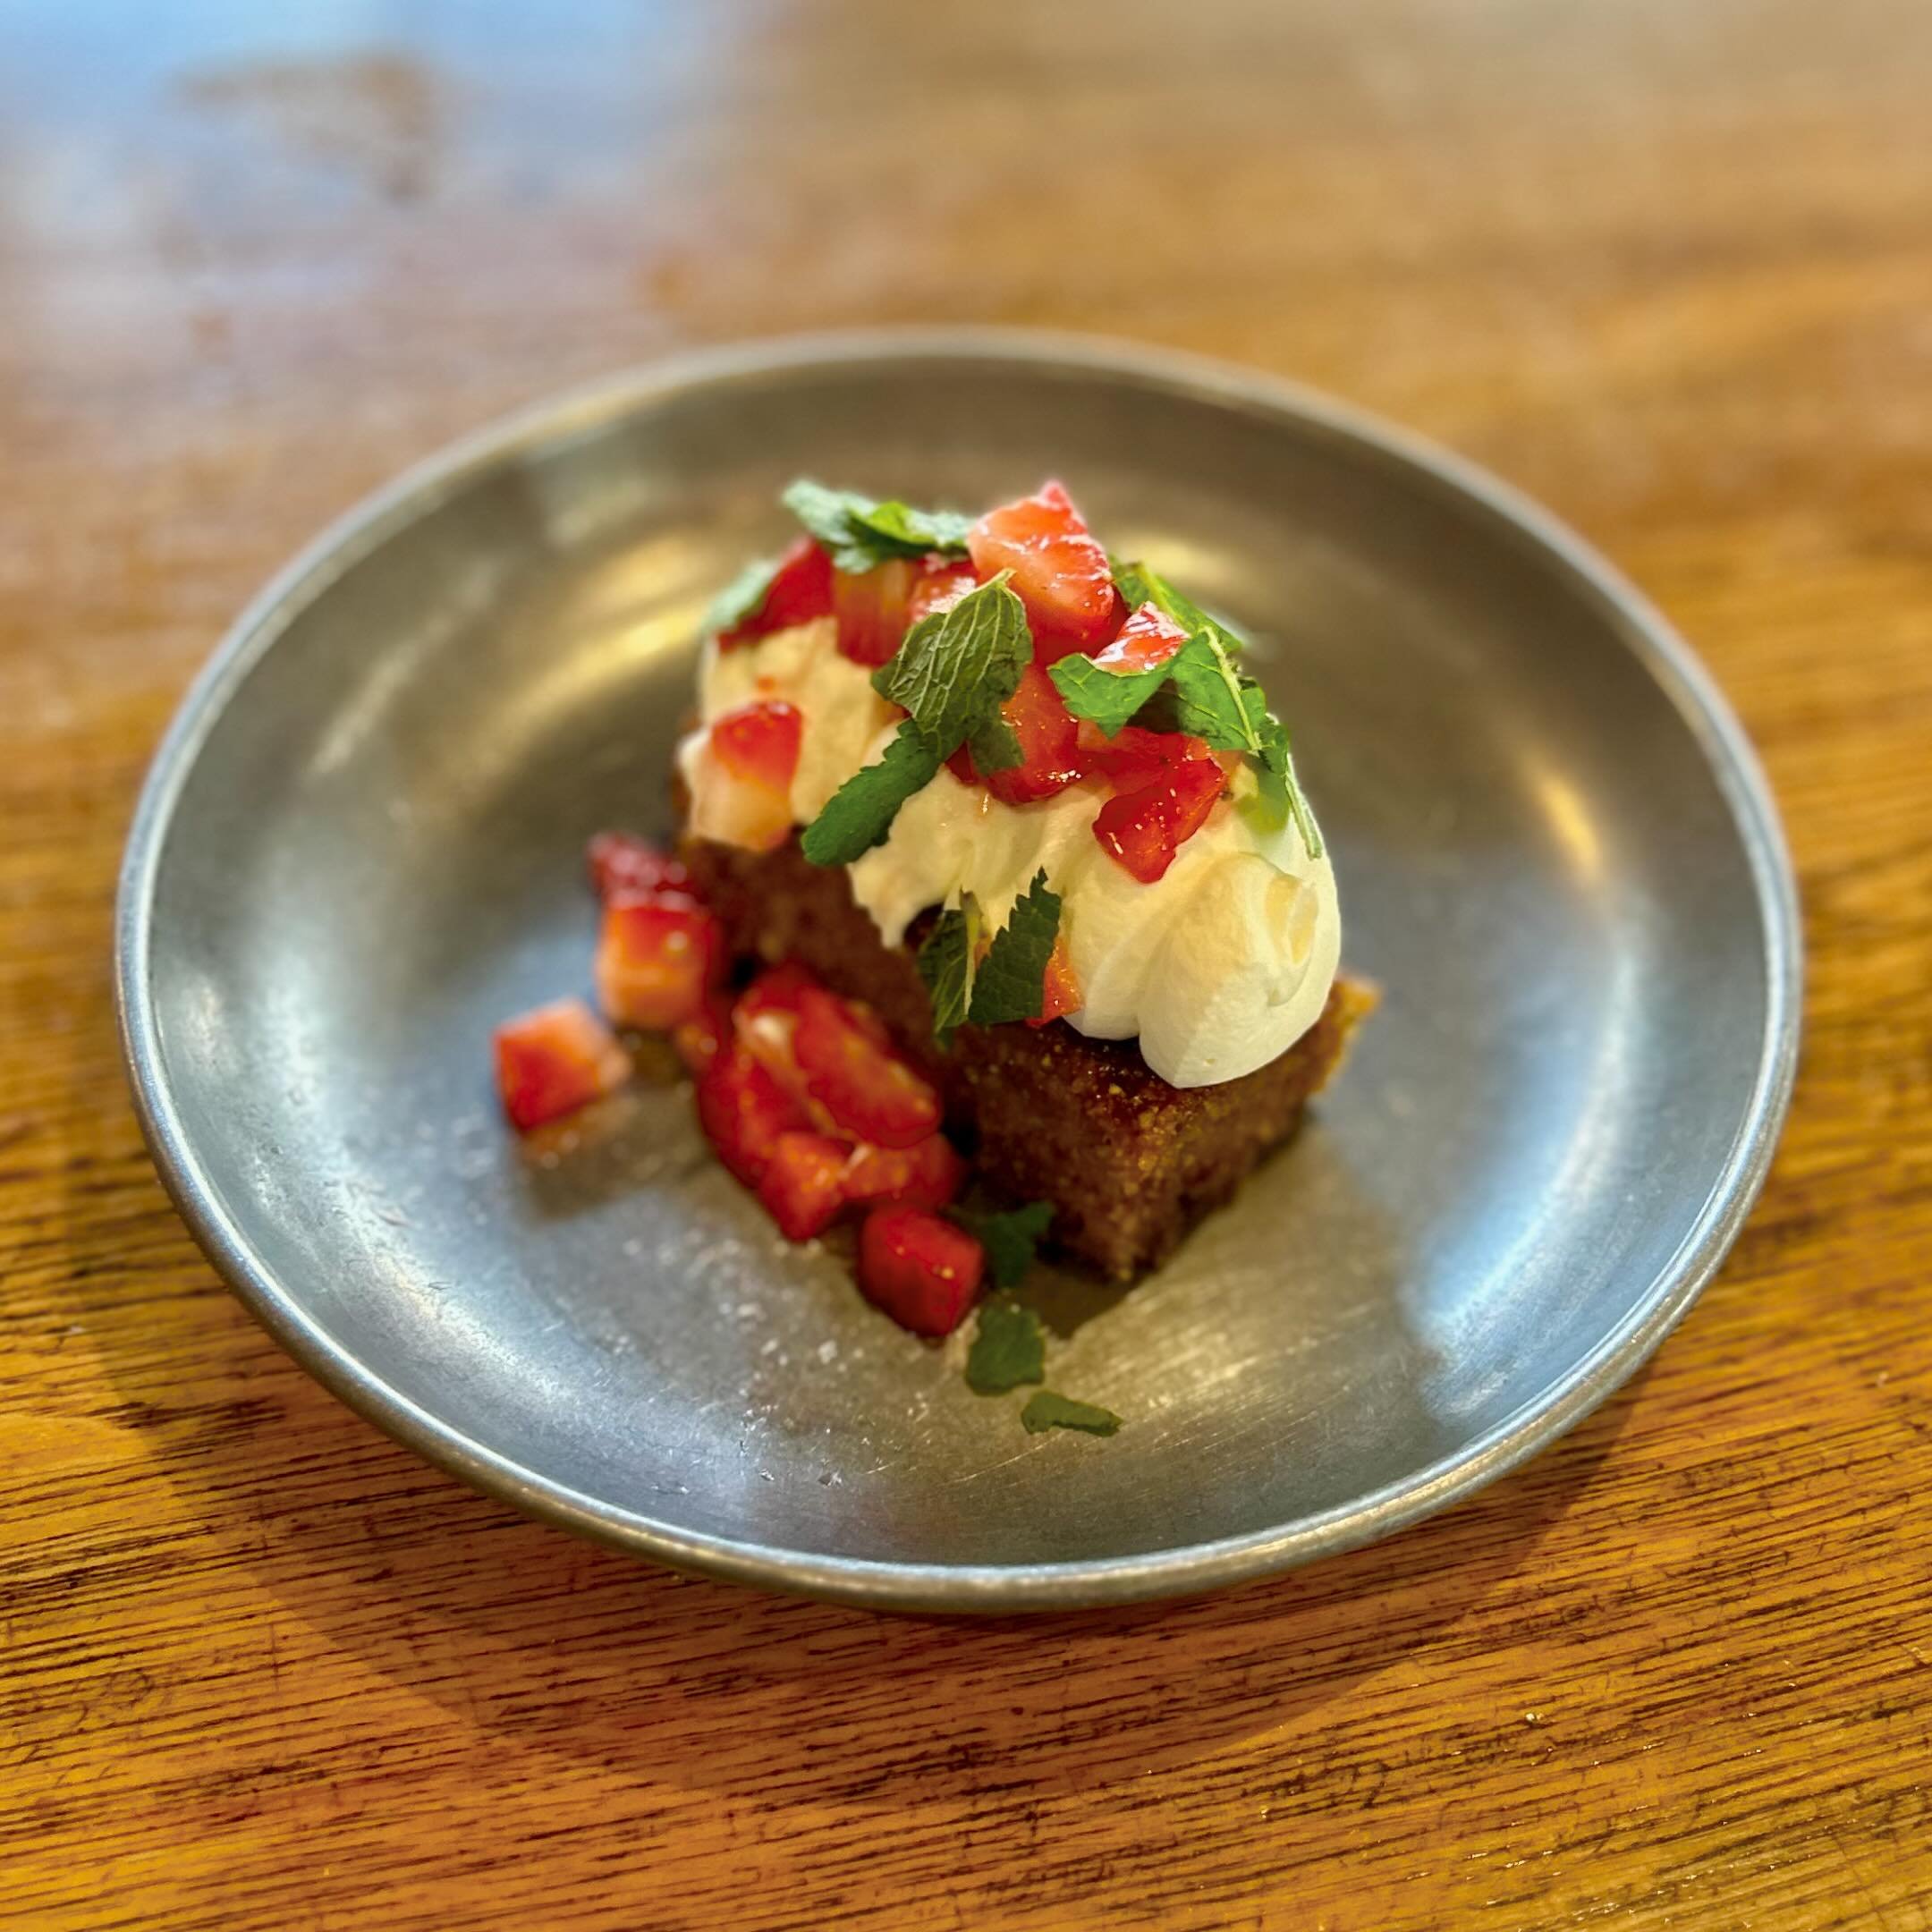 🍓Summer is coming&hellip;

&hellip;and so are the British Strawberries!

👨&zwj;🍳Chef has whipped up this banging lemon polenta cake, with simply whipped cream, mint and the freshest British strawberries!

✅Available now on our seasonal menu&hellip